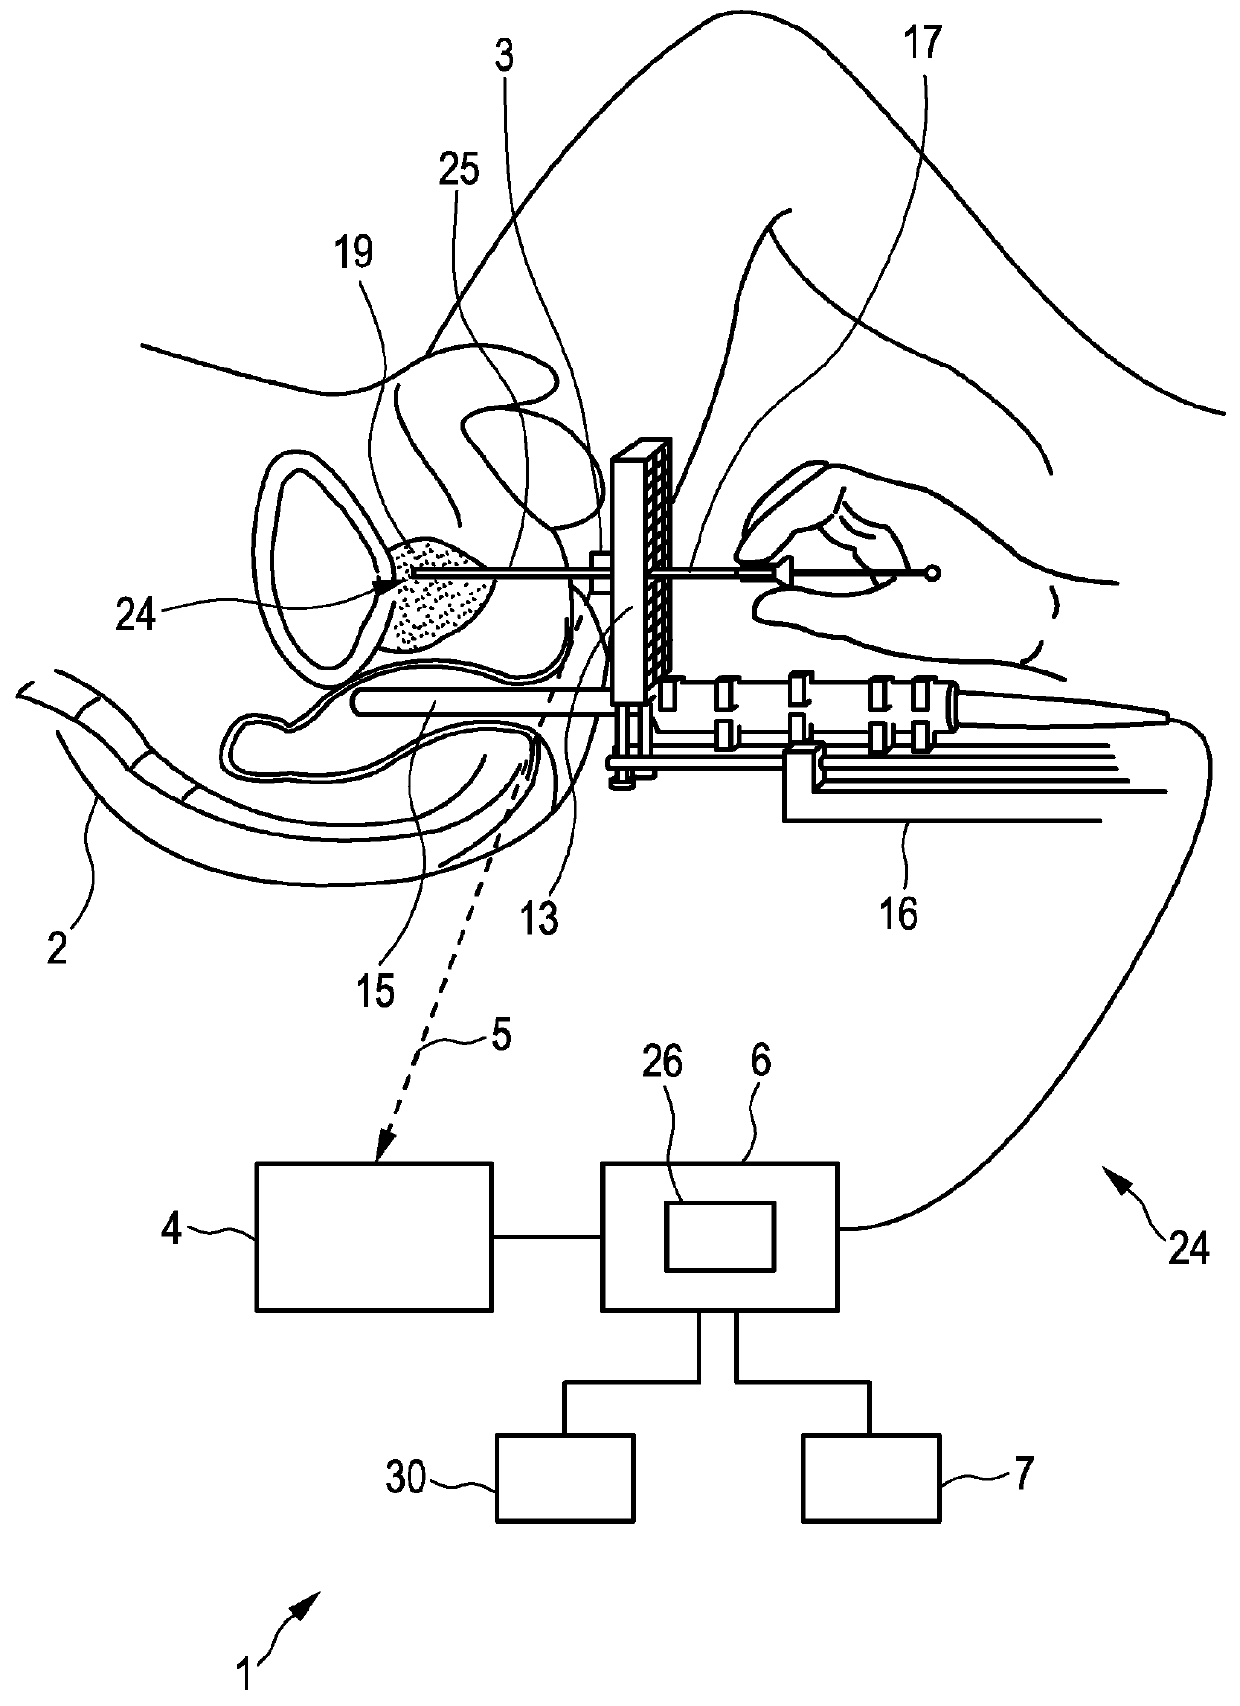 Imaging apparatus for brachytherapy or biopsy